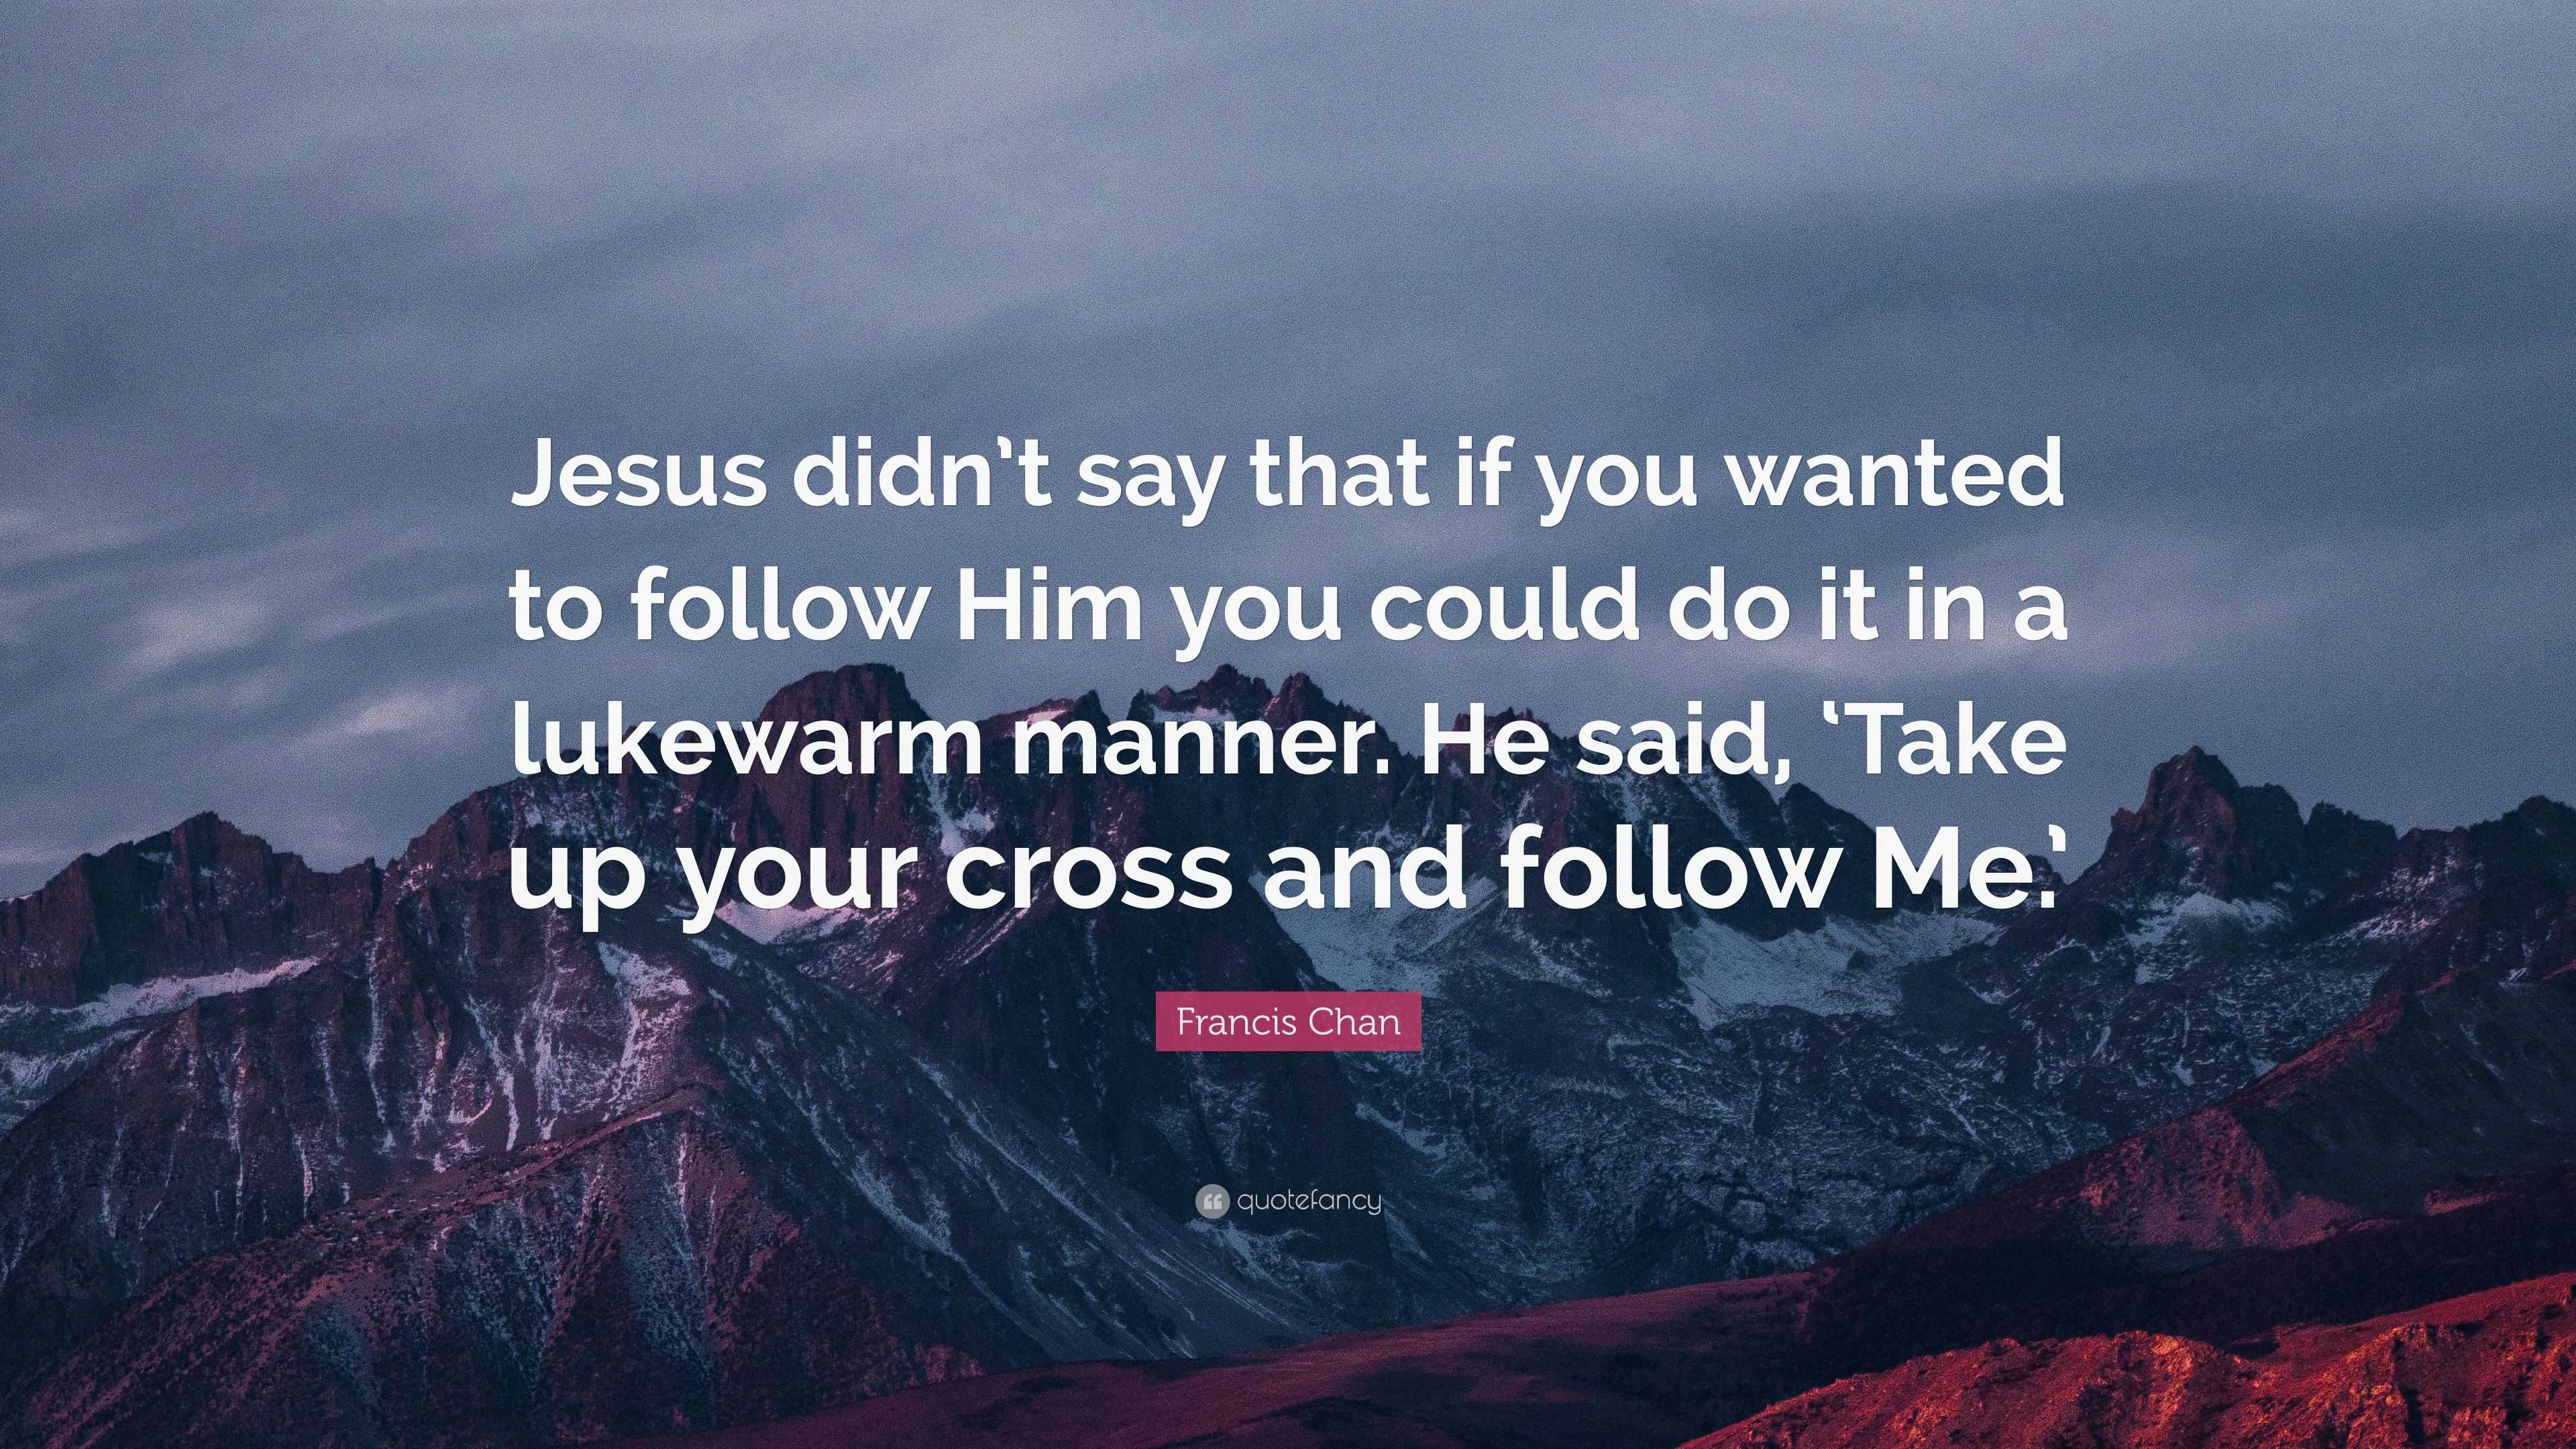 Francis Chan Quote: “Jesus didn’t say that if you wanted to follow Him ...